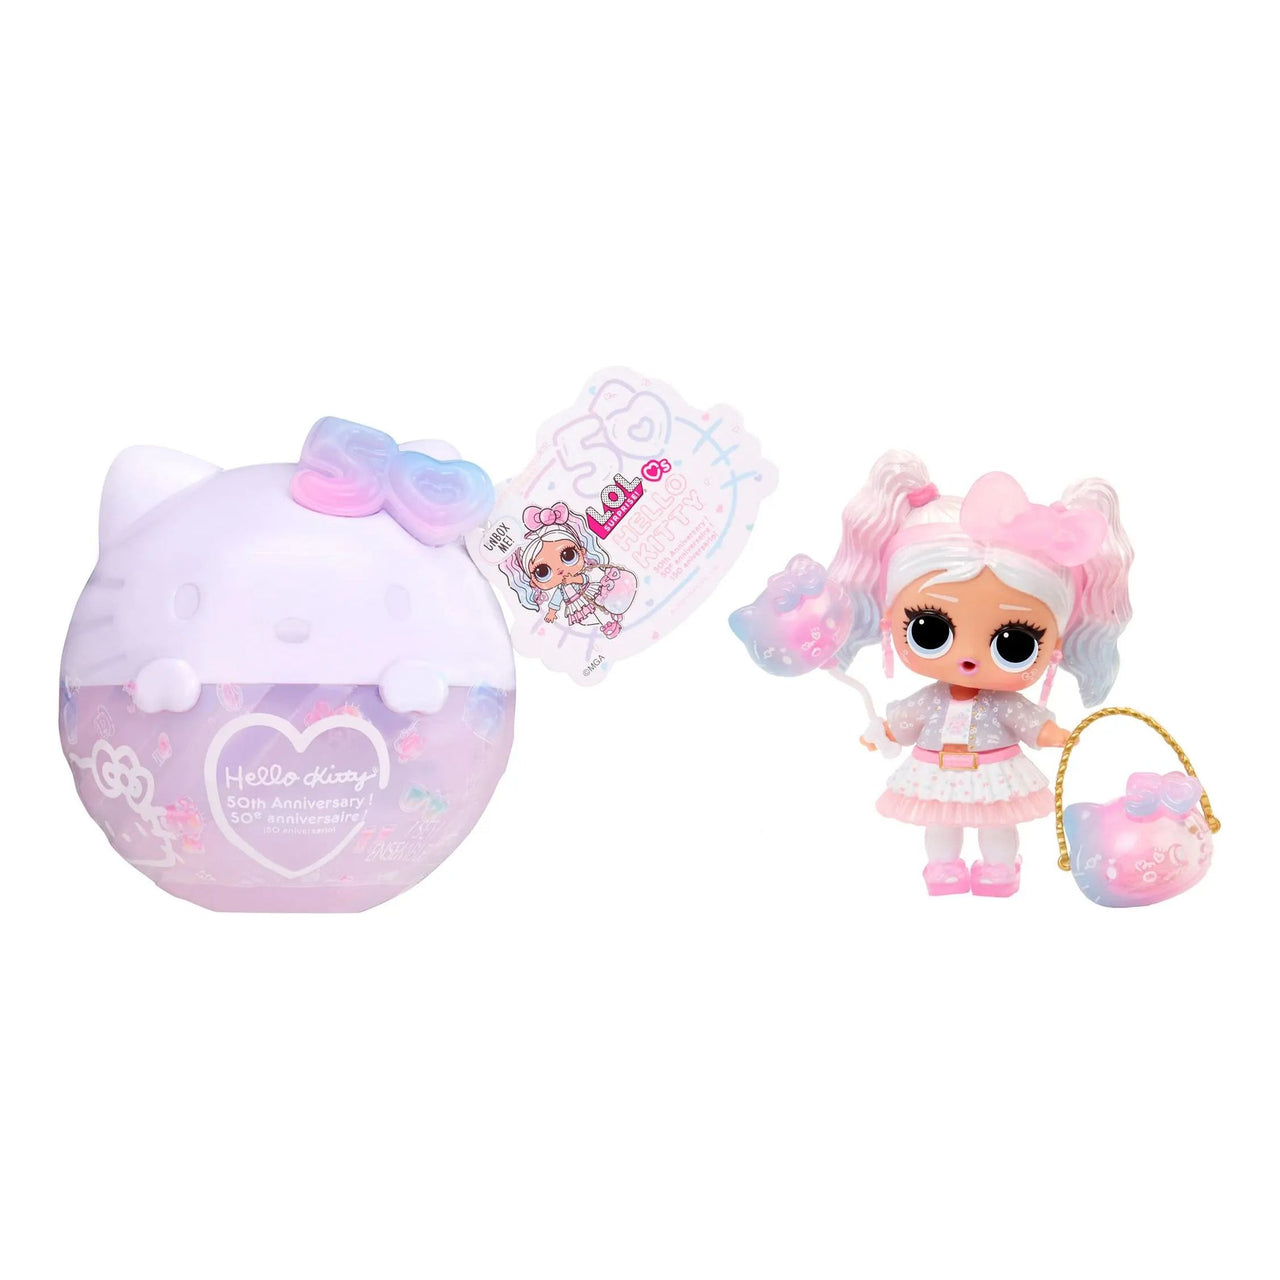 L.O.L. Surprise! Loves Hello Kitty Miss Pearly Doll LOL Surprise